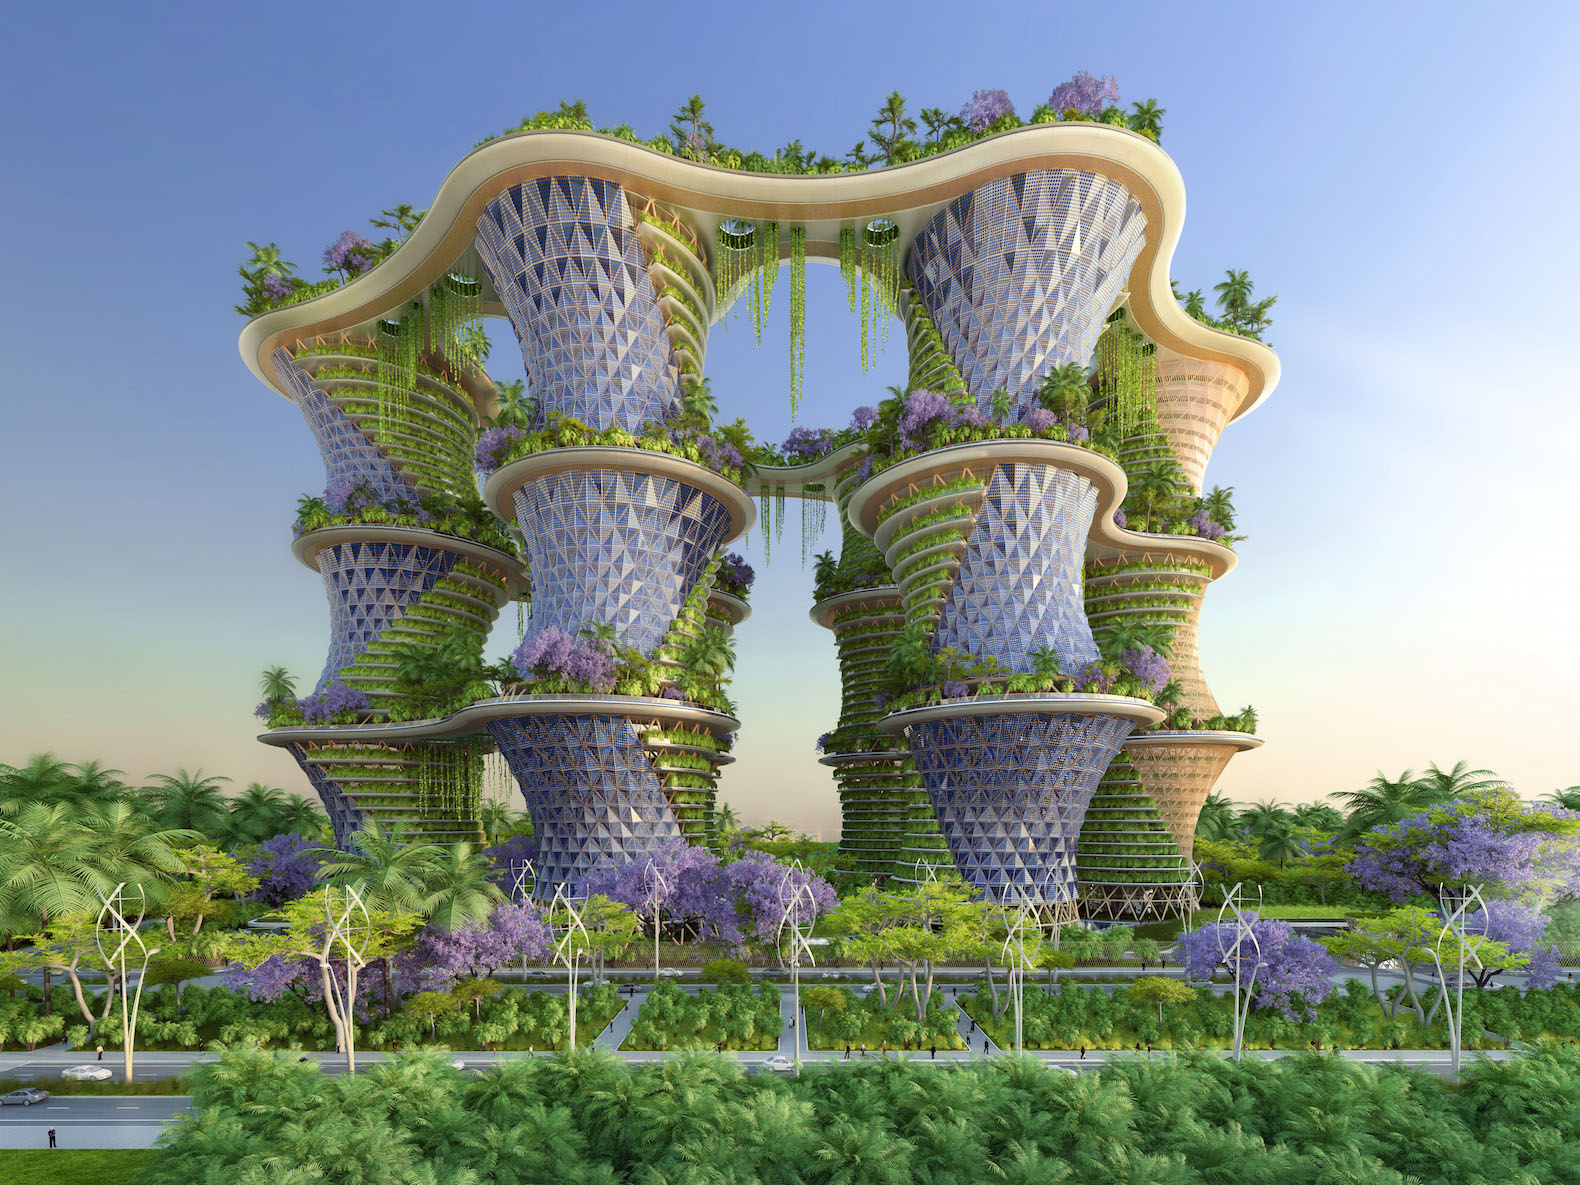 hyperions-by-vincent-callebaut-12